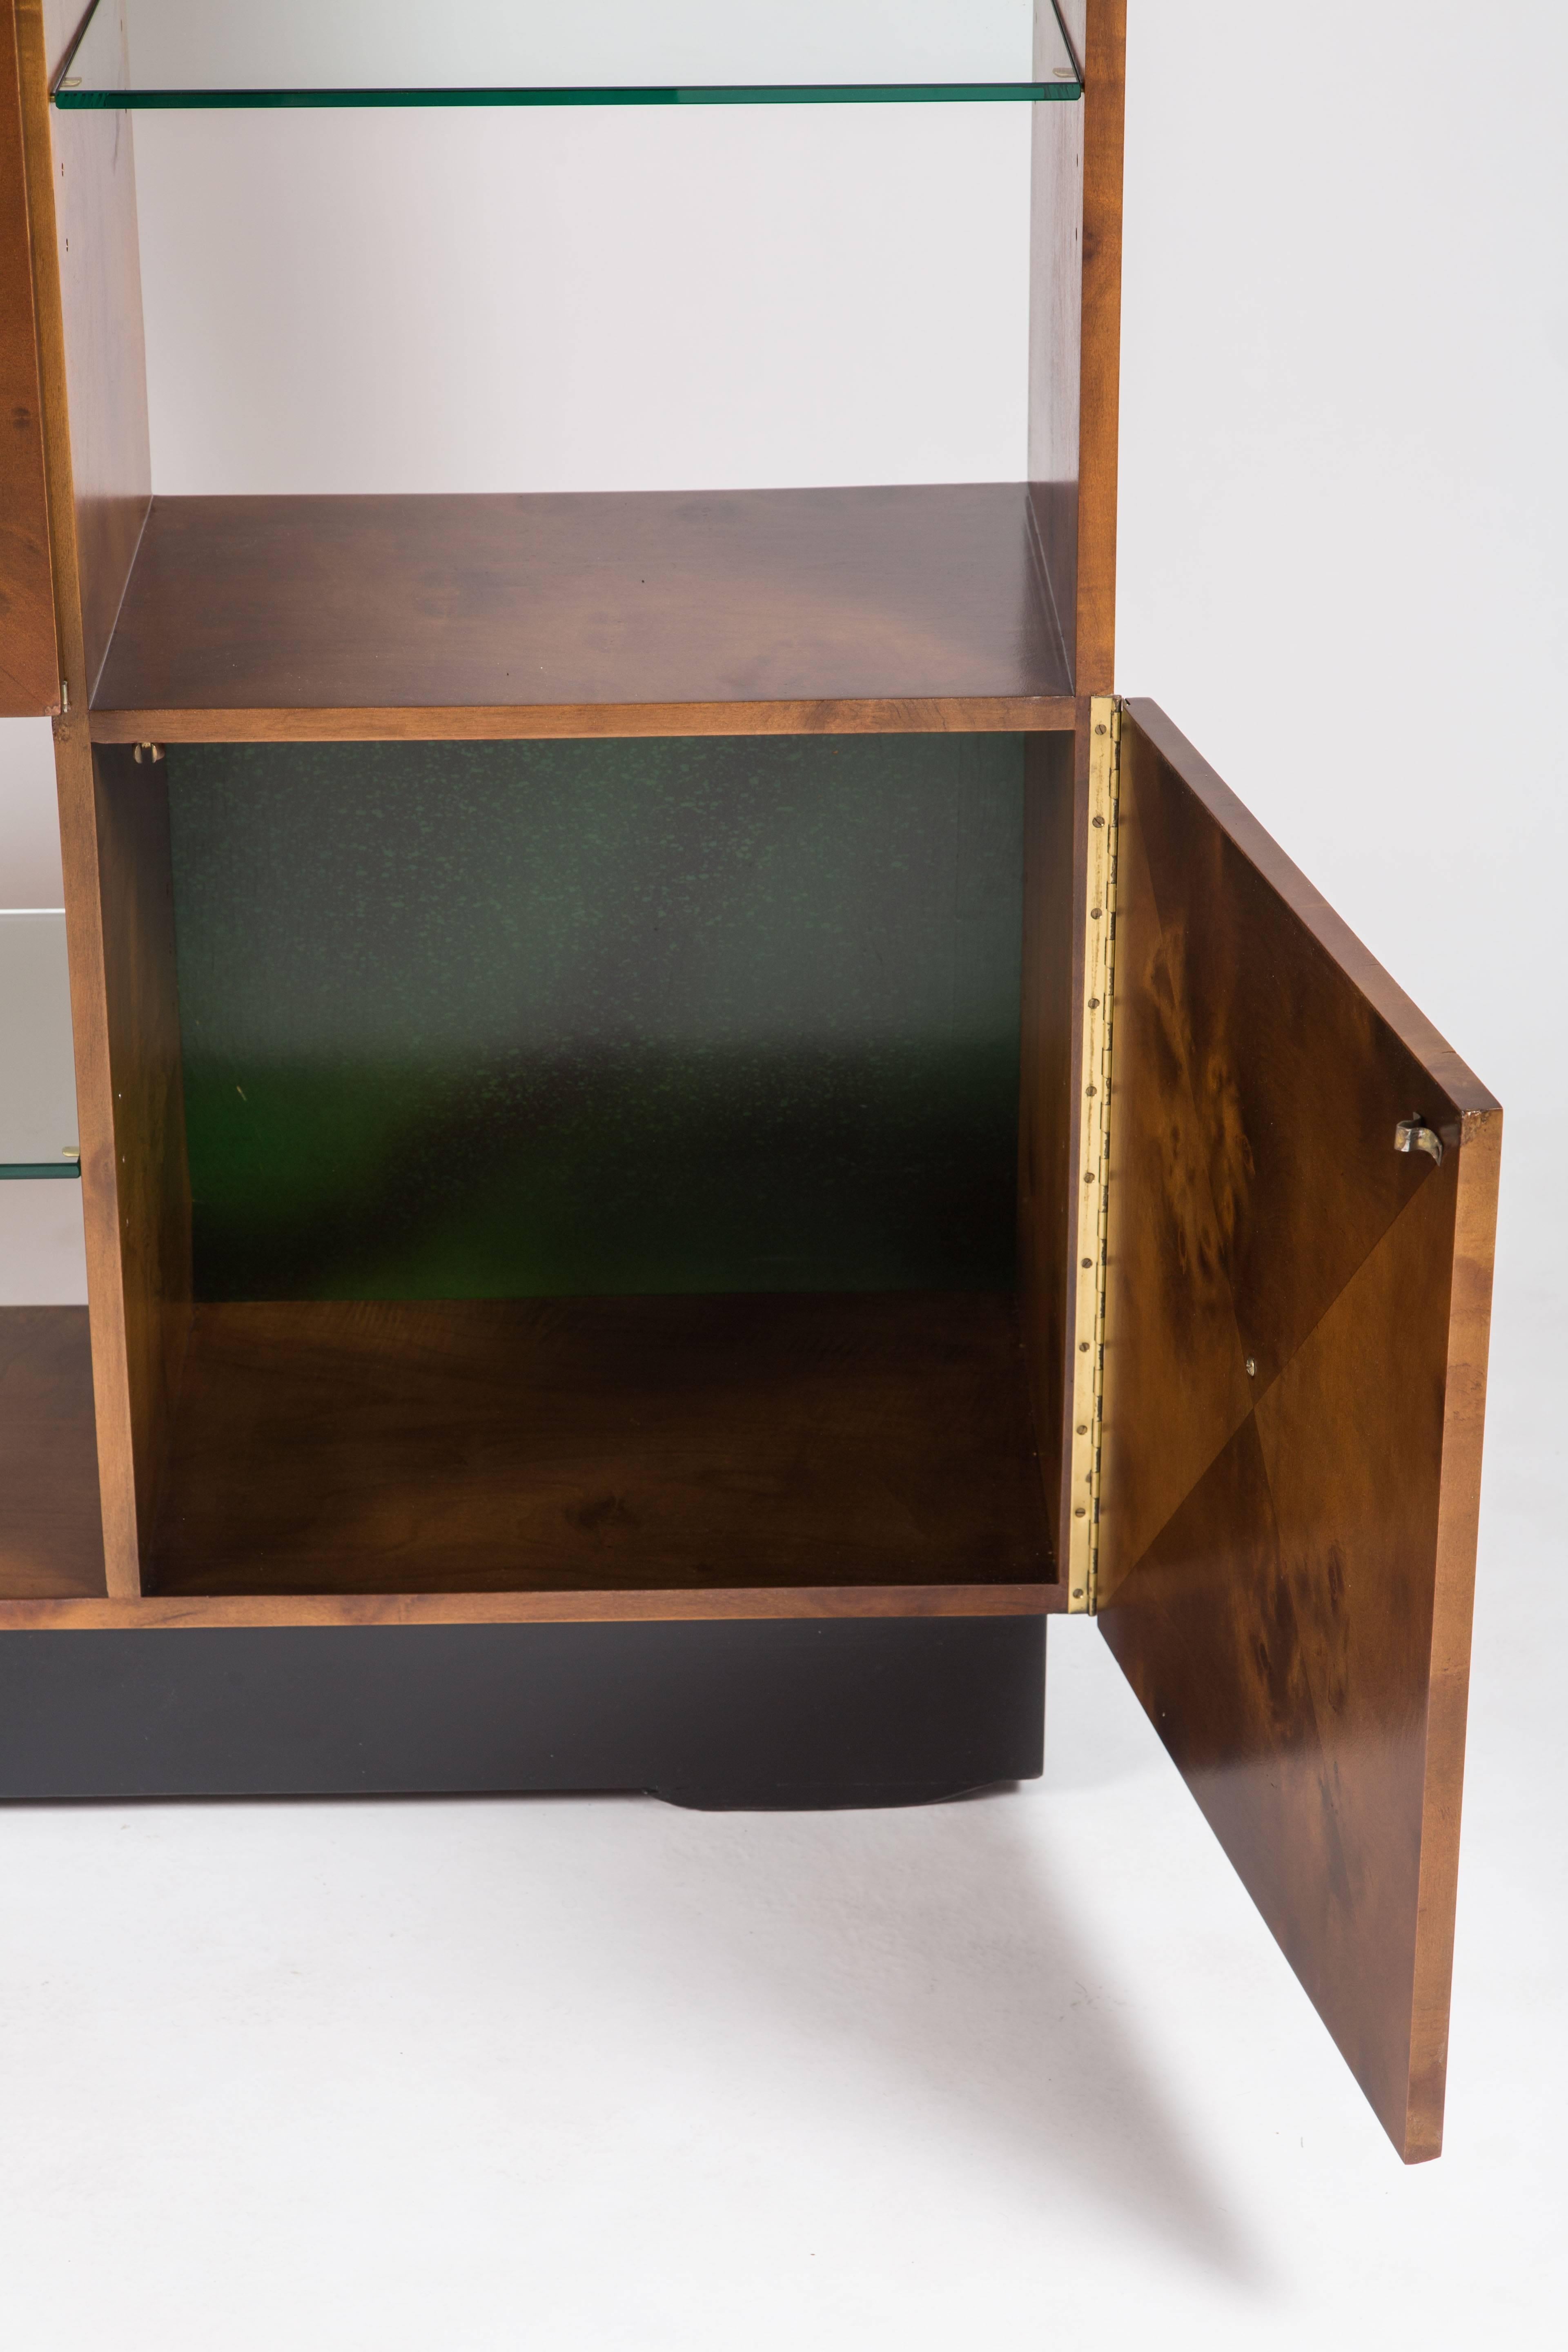 Art Deco Geometric Cabinet Bookcase with Drop Down Desk by Johan Tapp for Gumps